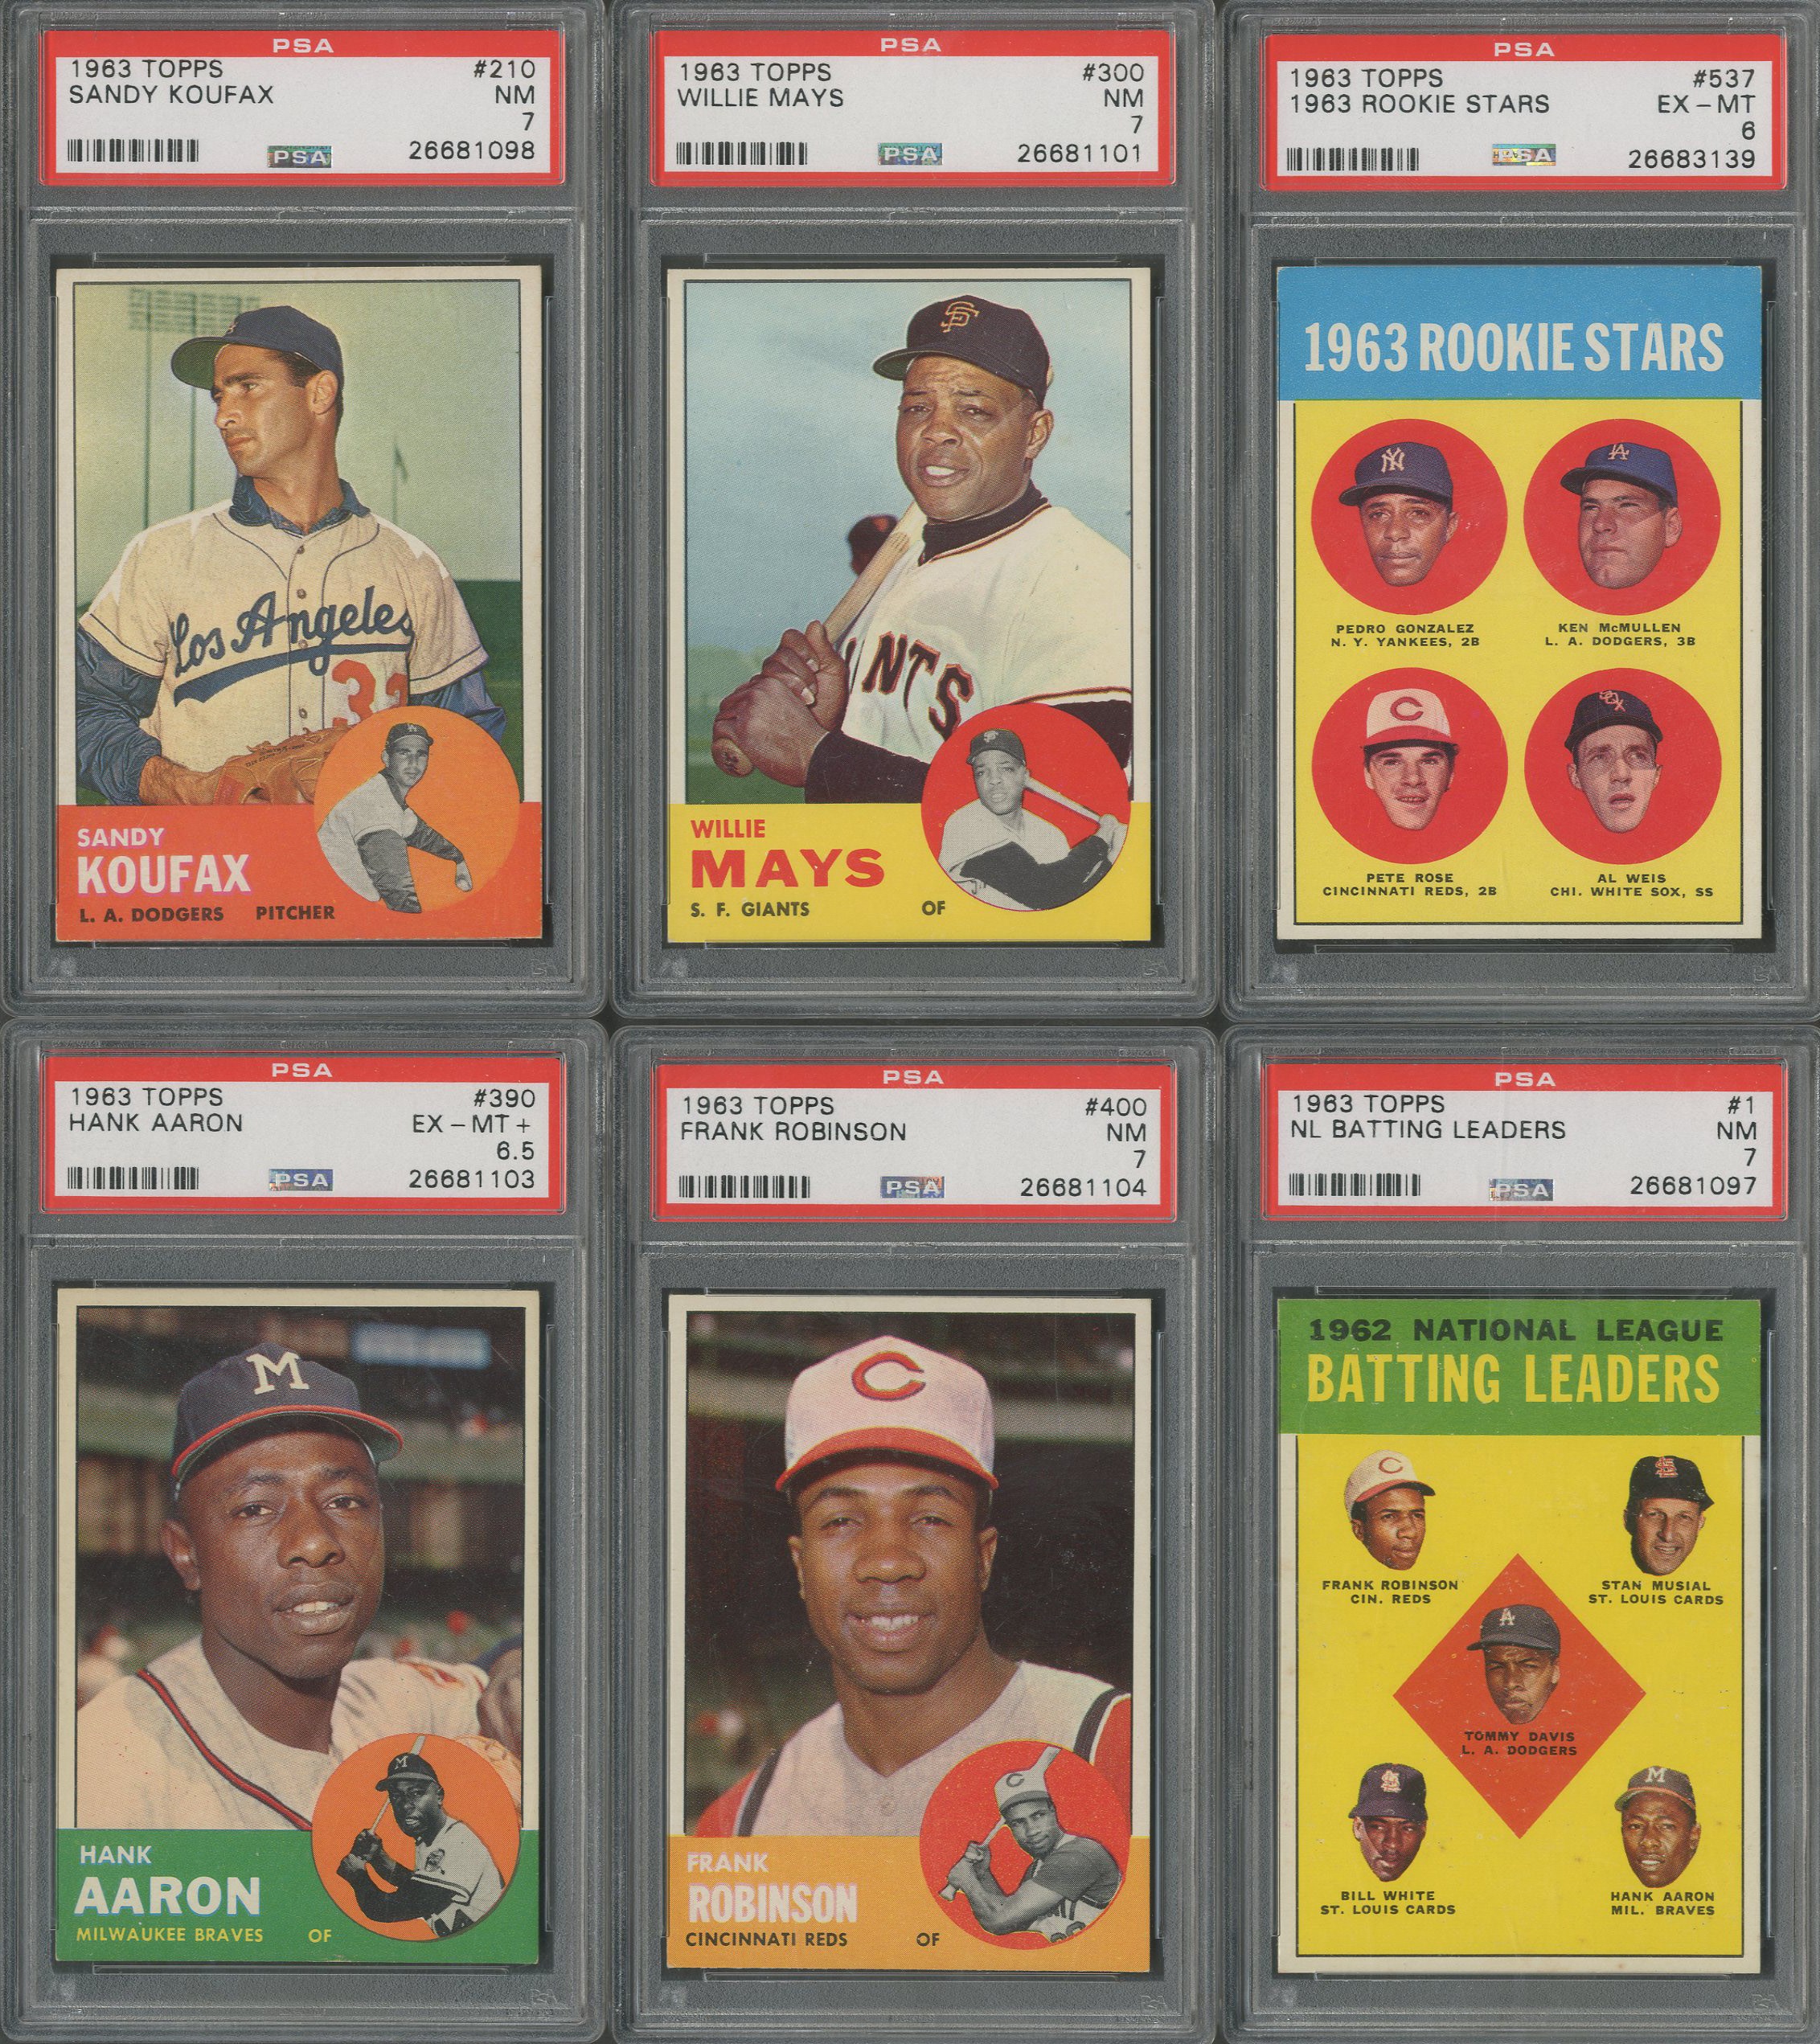 Baseball and Trading Cards - 1963 Topps Very High Grade Complete Set (576) with (8) PSA Graded